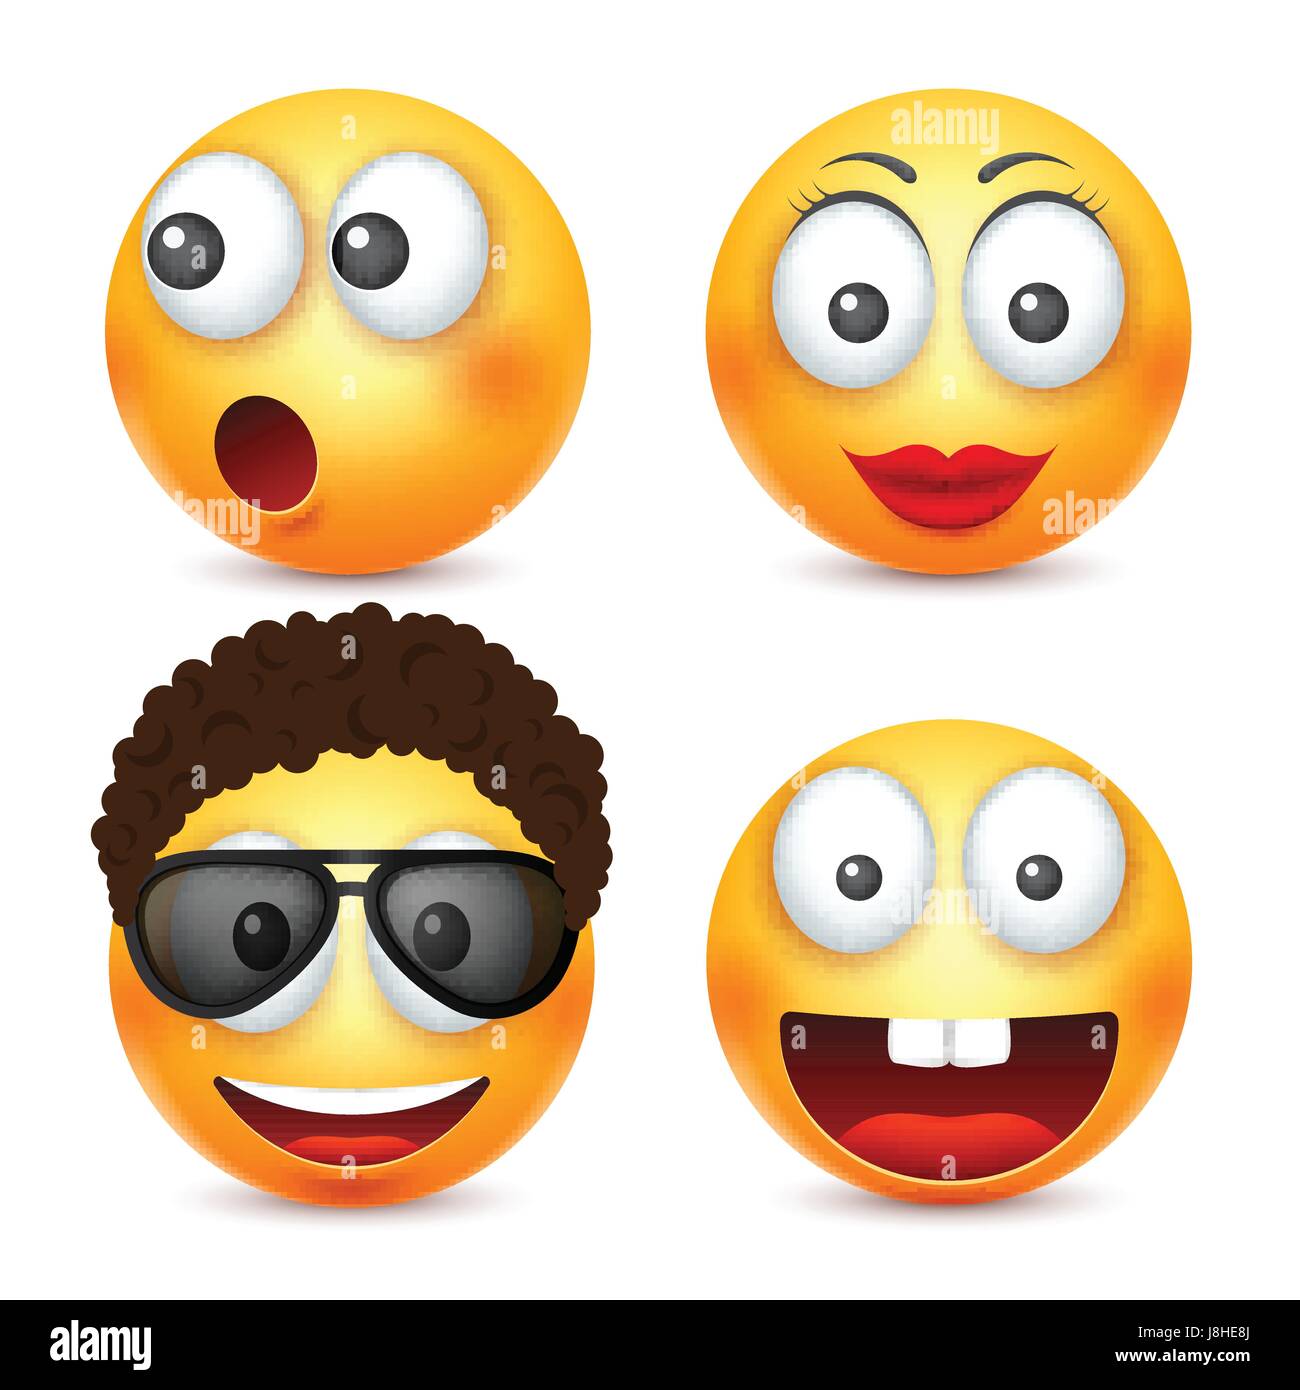 Smiley with glasses,smiling emoticon. Yellow face with emotions. Facial expression. 3d realistic emoji. Funny cartoon character.Mood. Web icon. Vector illustration. Stock Vector